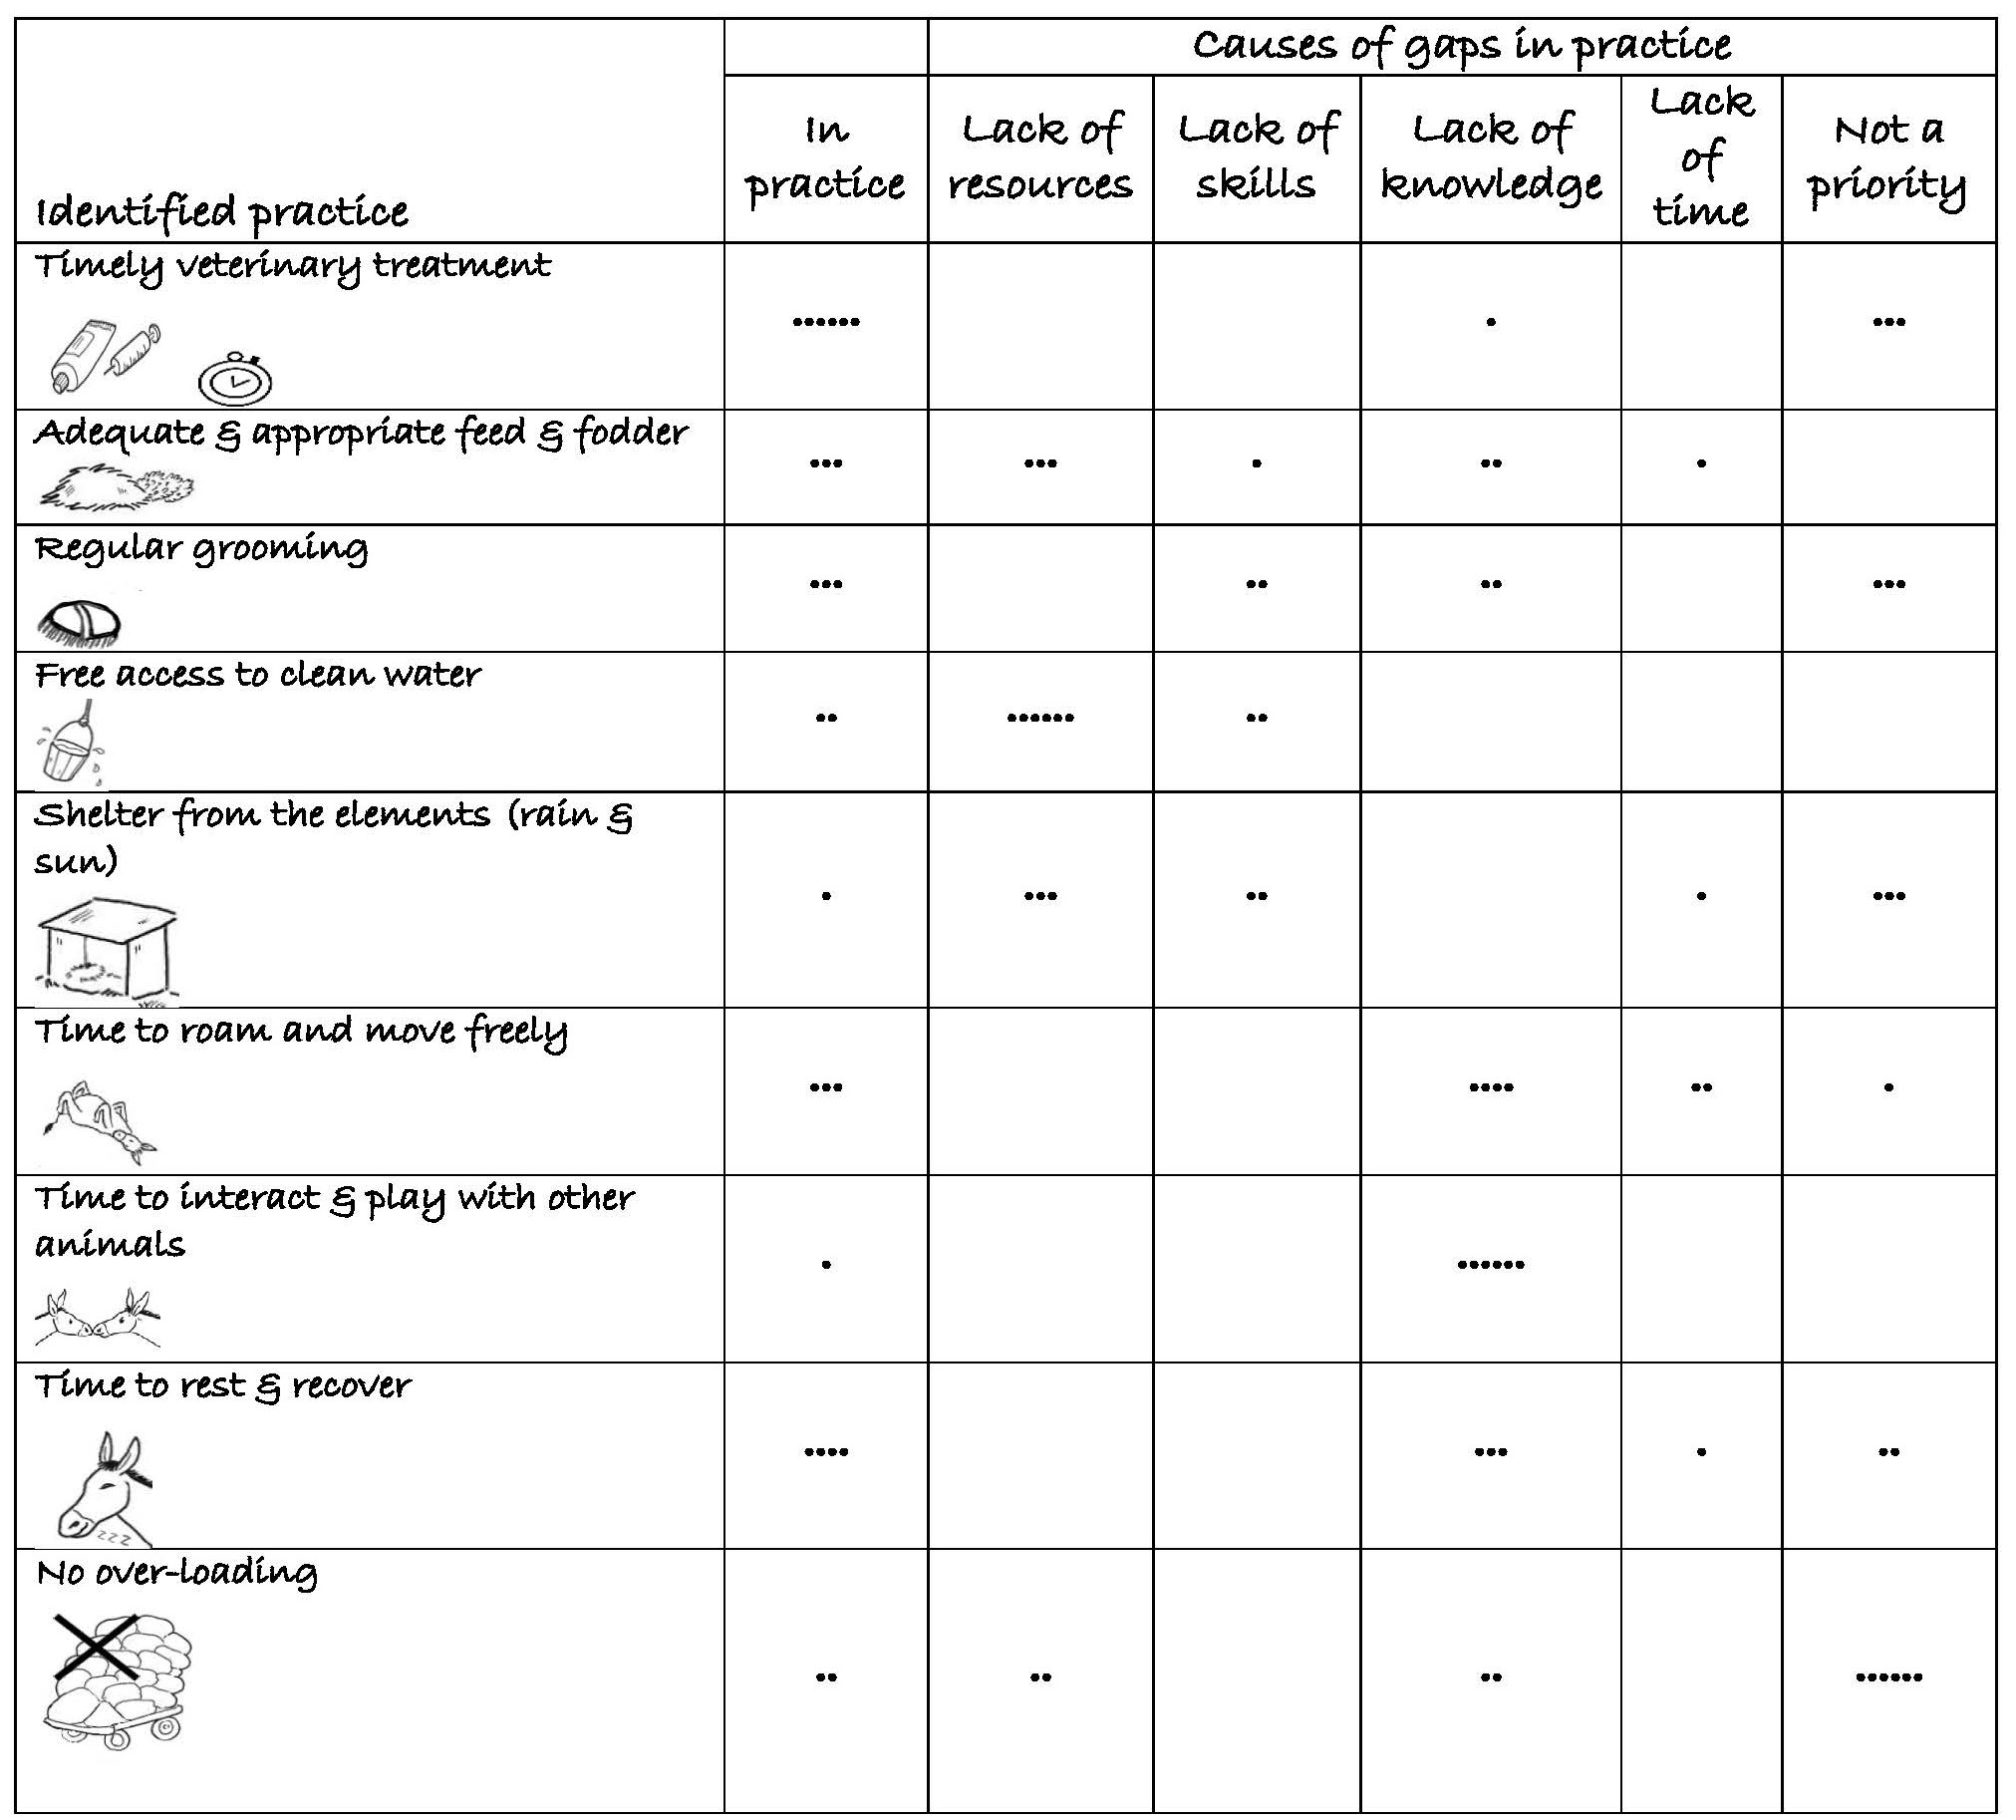 Figure T21a Animal welfare practice gap analysis carried out by animal owners